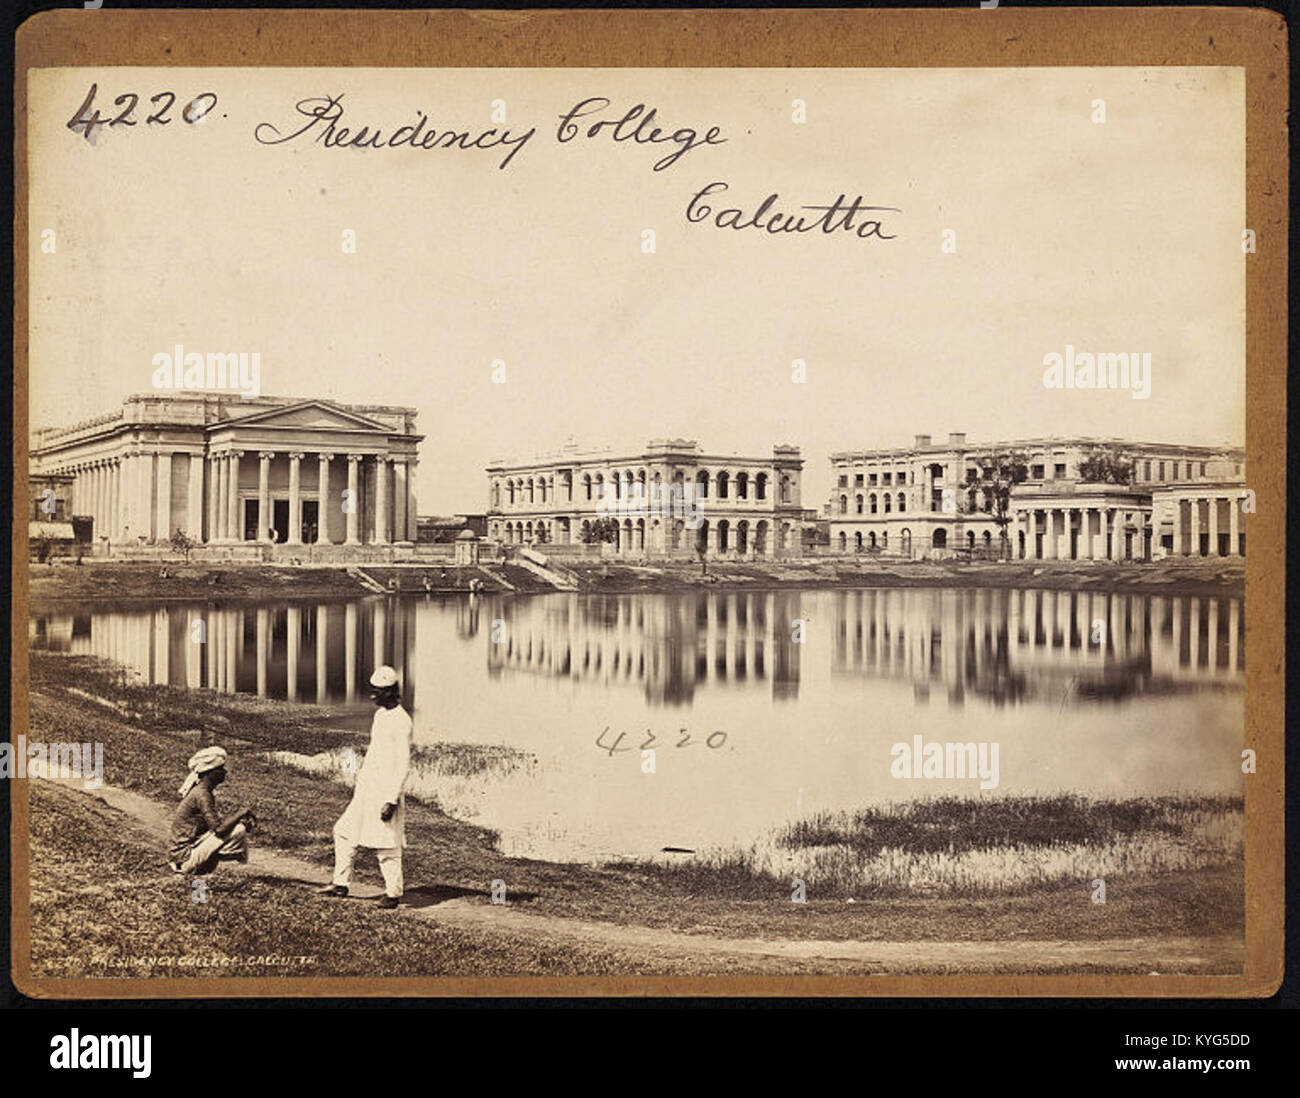 Presidency College, Calcutta by Francis Frith (1) Stock Photo